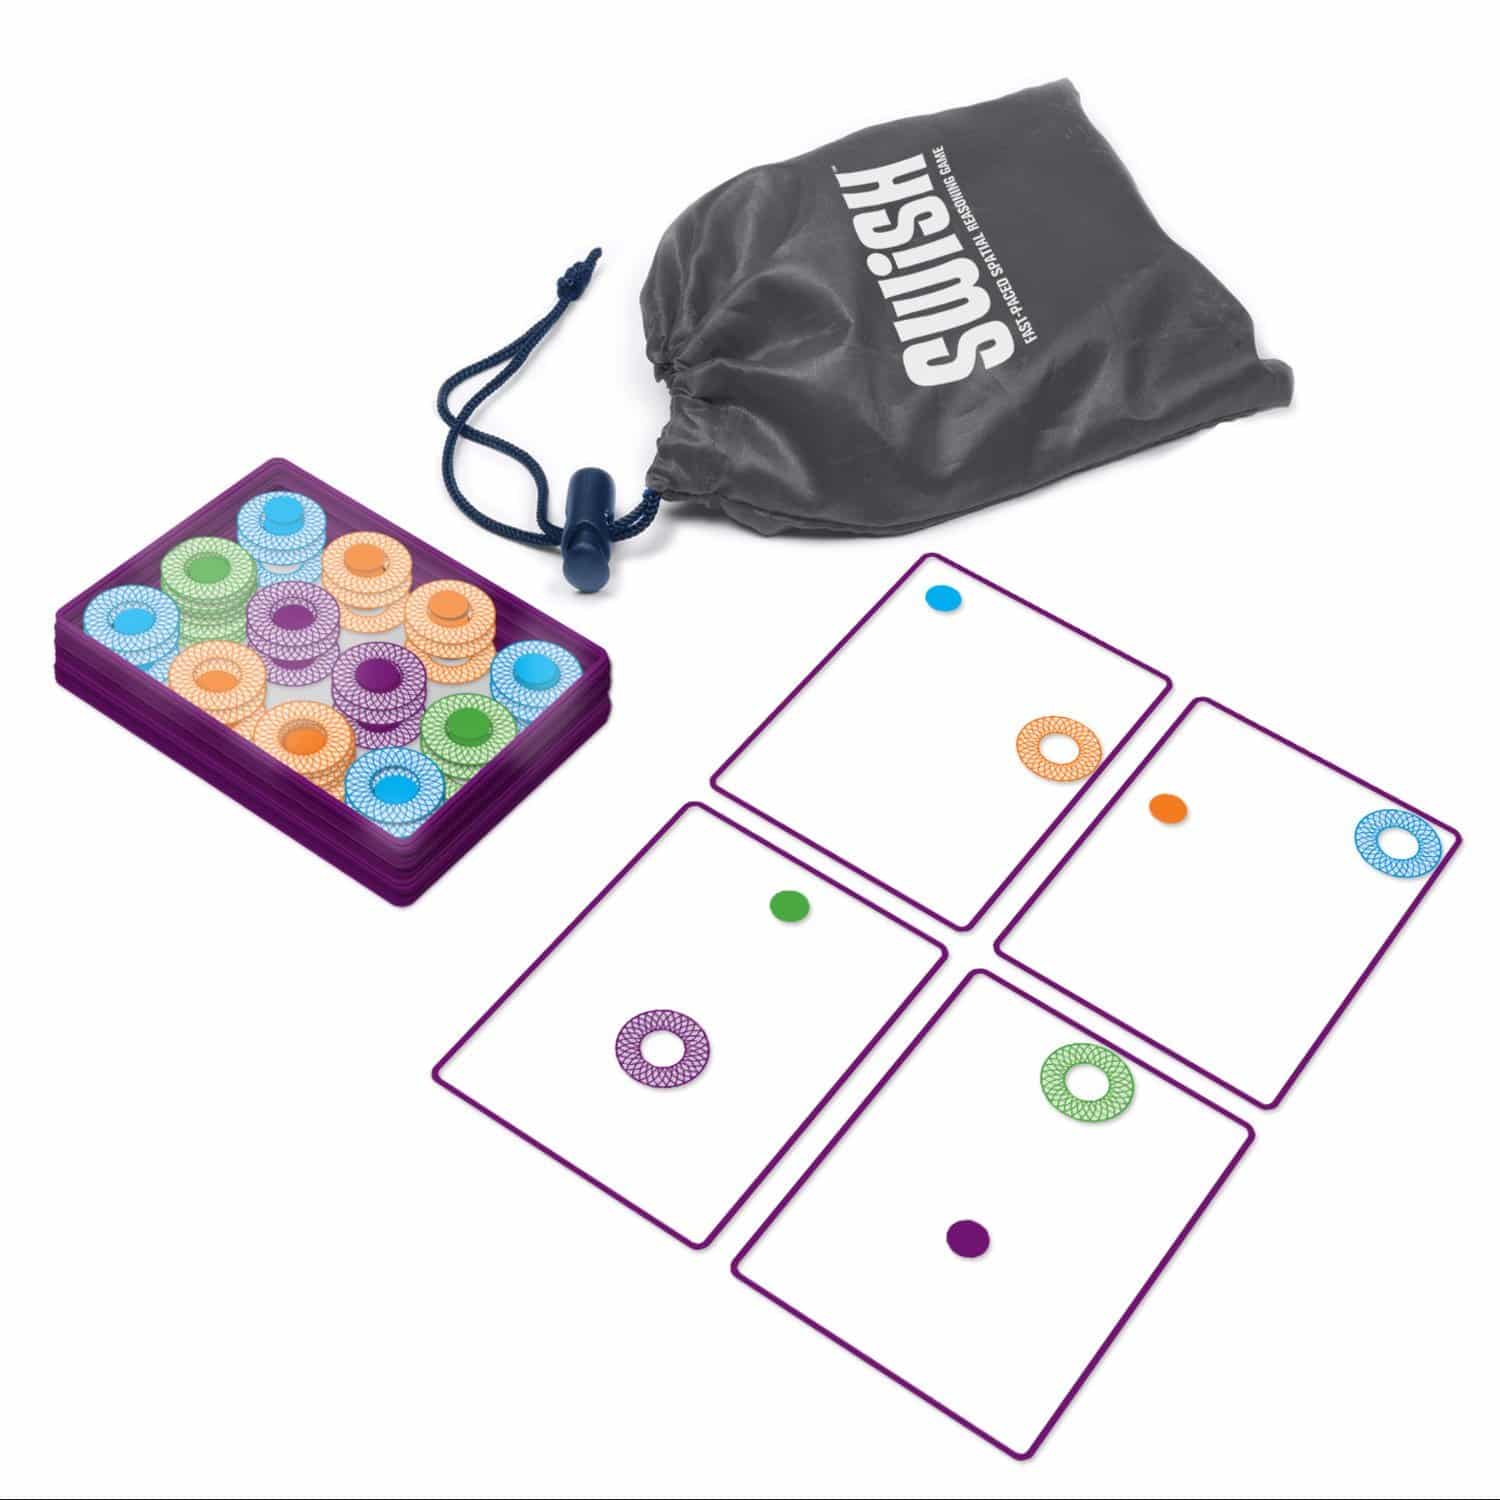 LIGHTNING DEAL ALERT! Swish Card Game is a GREAT Stocking Stuffer and is 30% off!